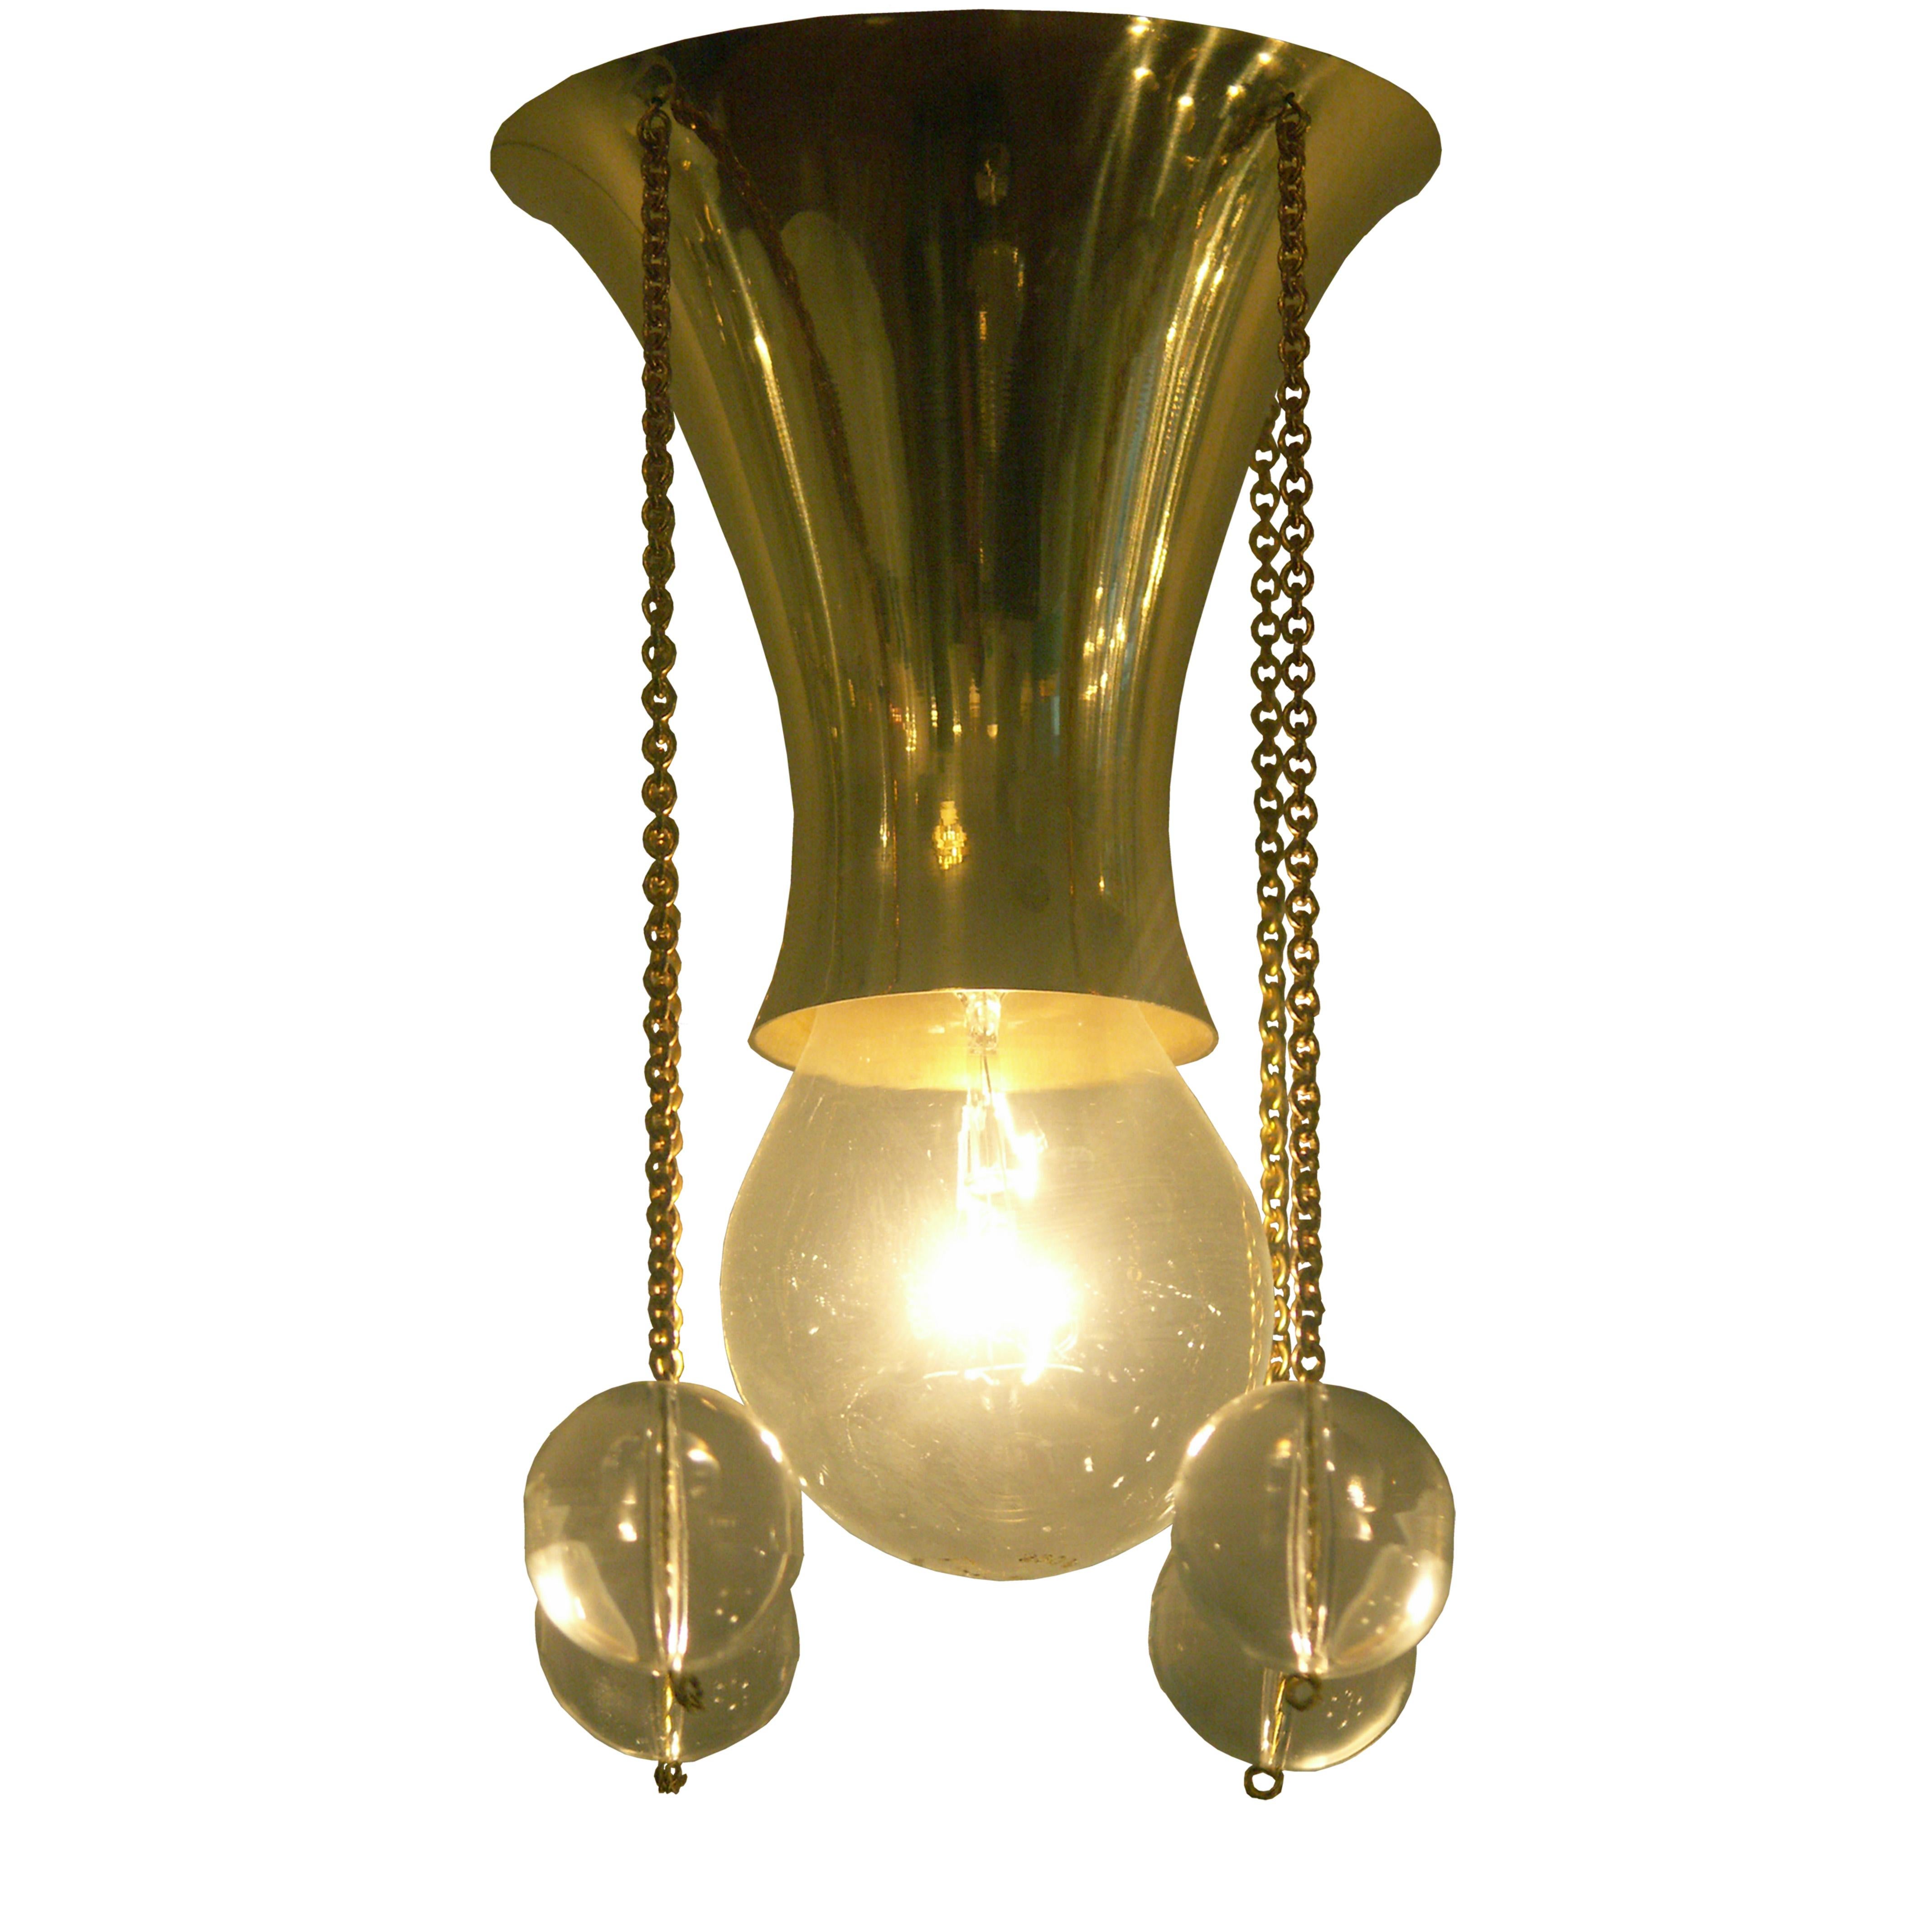 Hanging- lamp from the showrooms of the Wiener Werkstaette used by Hoffmann in several variations. Hammered originally. Works-number M115, pattern-book of the Wiener Werkstaette: WWMB 3 p. 256-257.
Material used is crystal-glass-balls, patinated